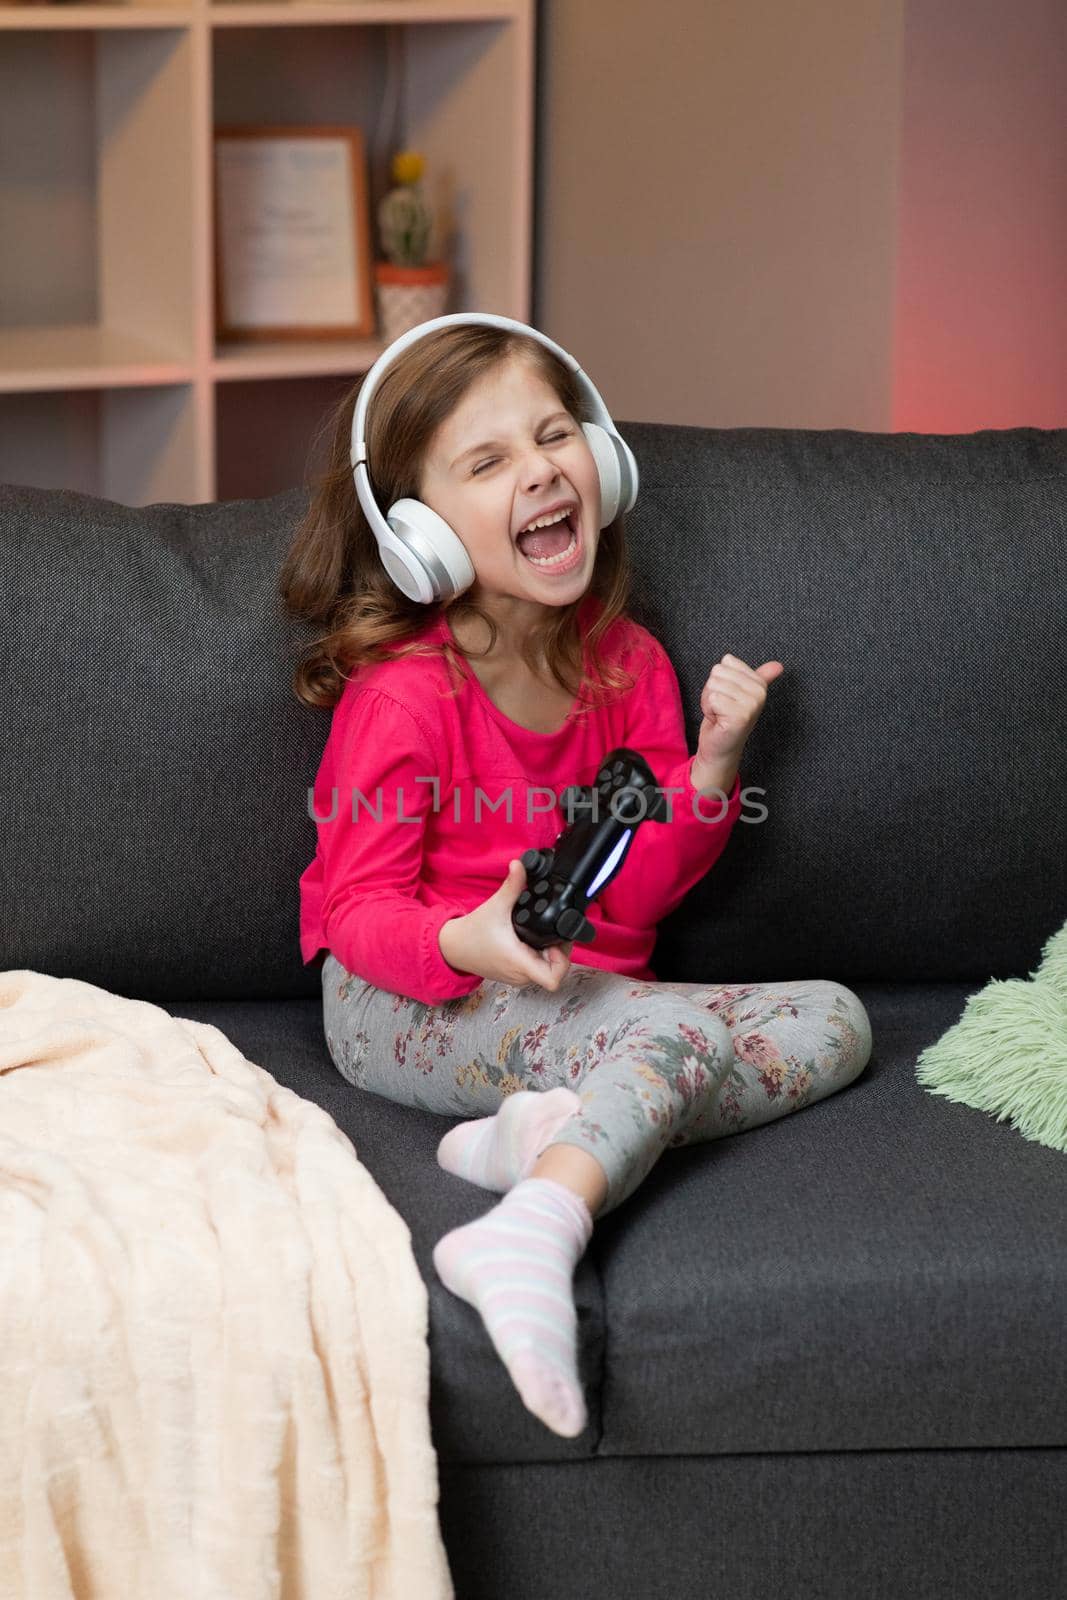 Little girl sitting on sofa playing a video in living room at home. Excited gamer girl hand holding joystick playing console game using a wireless controller. Having fun,enjoy happy expression.